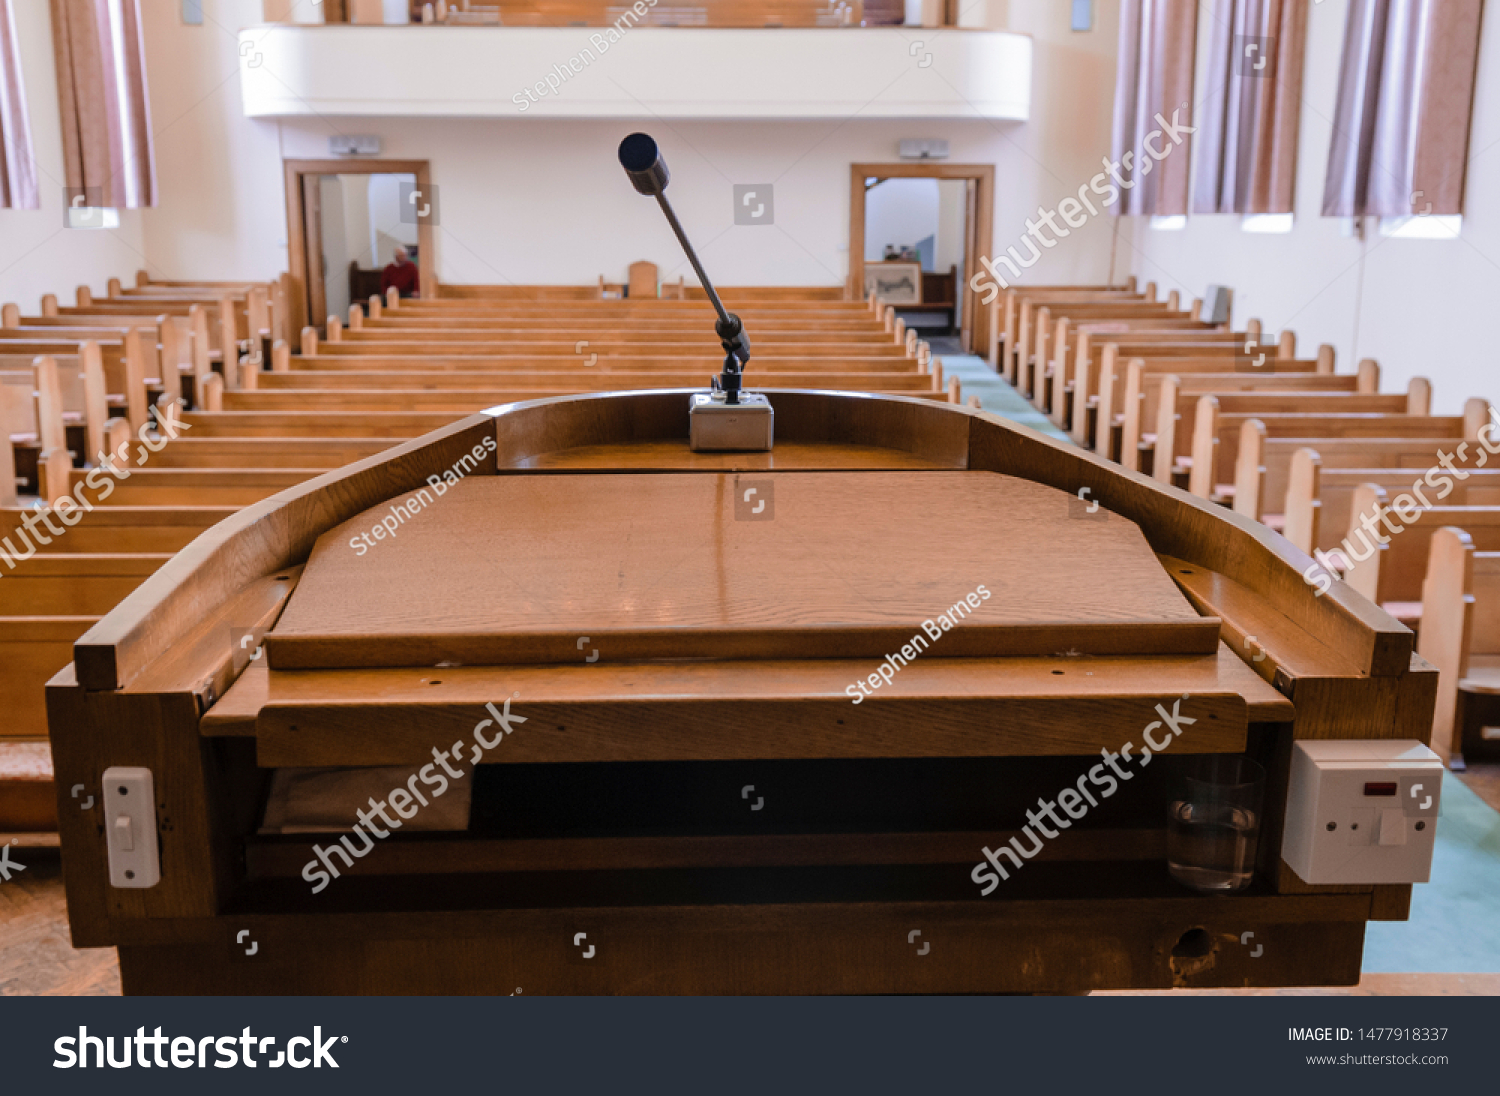 Pulpit at the a church with wooden pews #1477918337